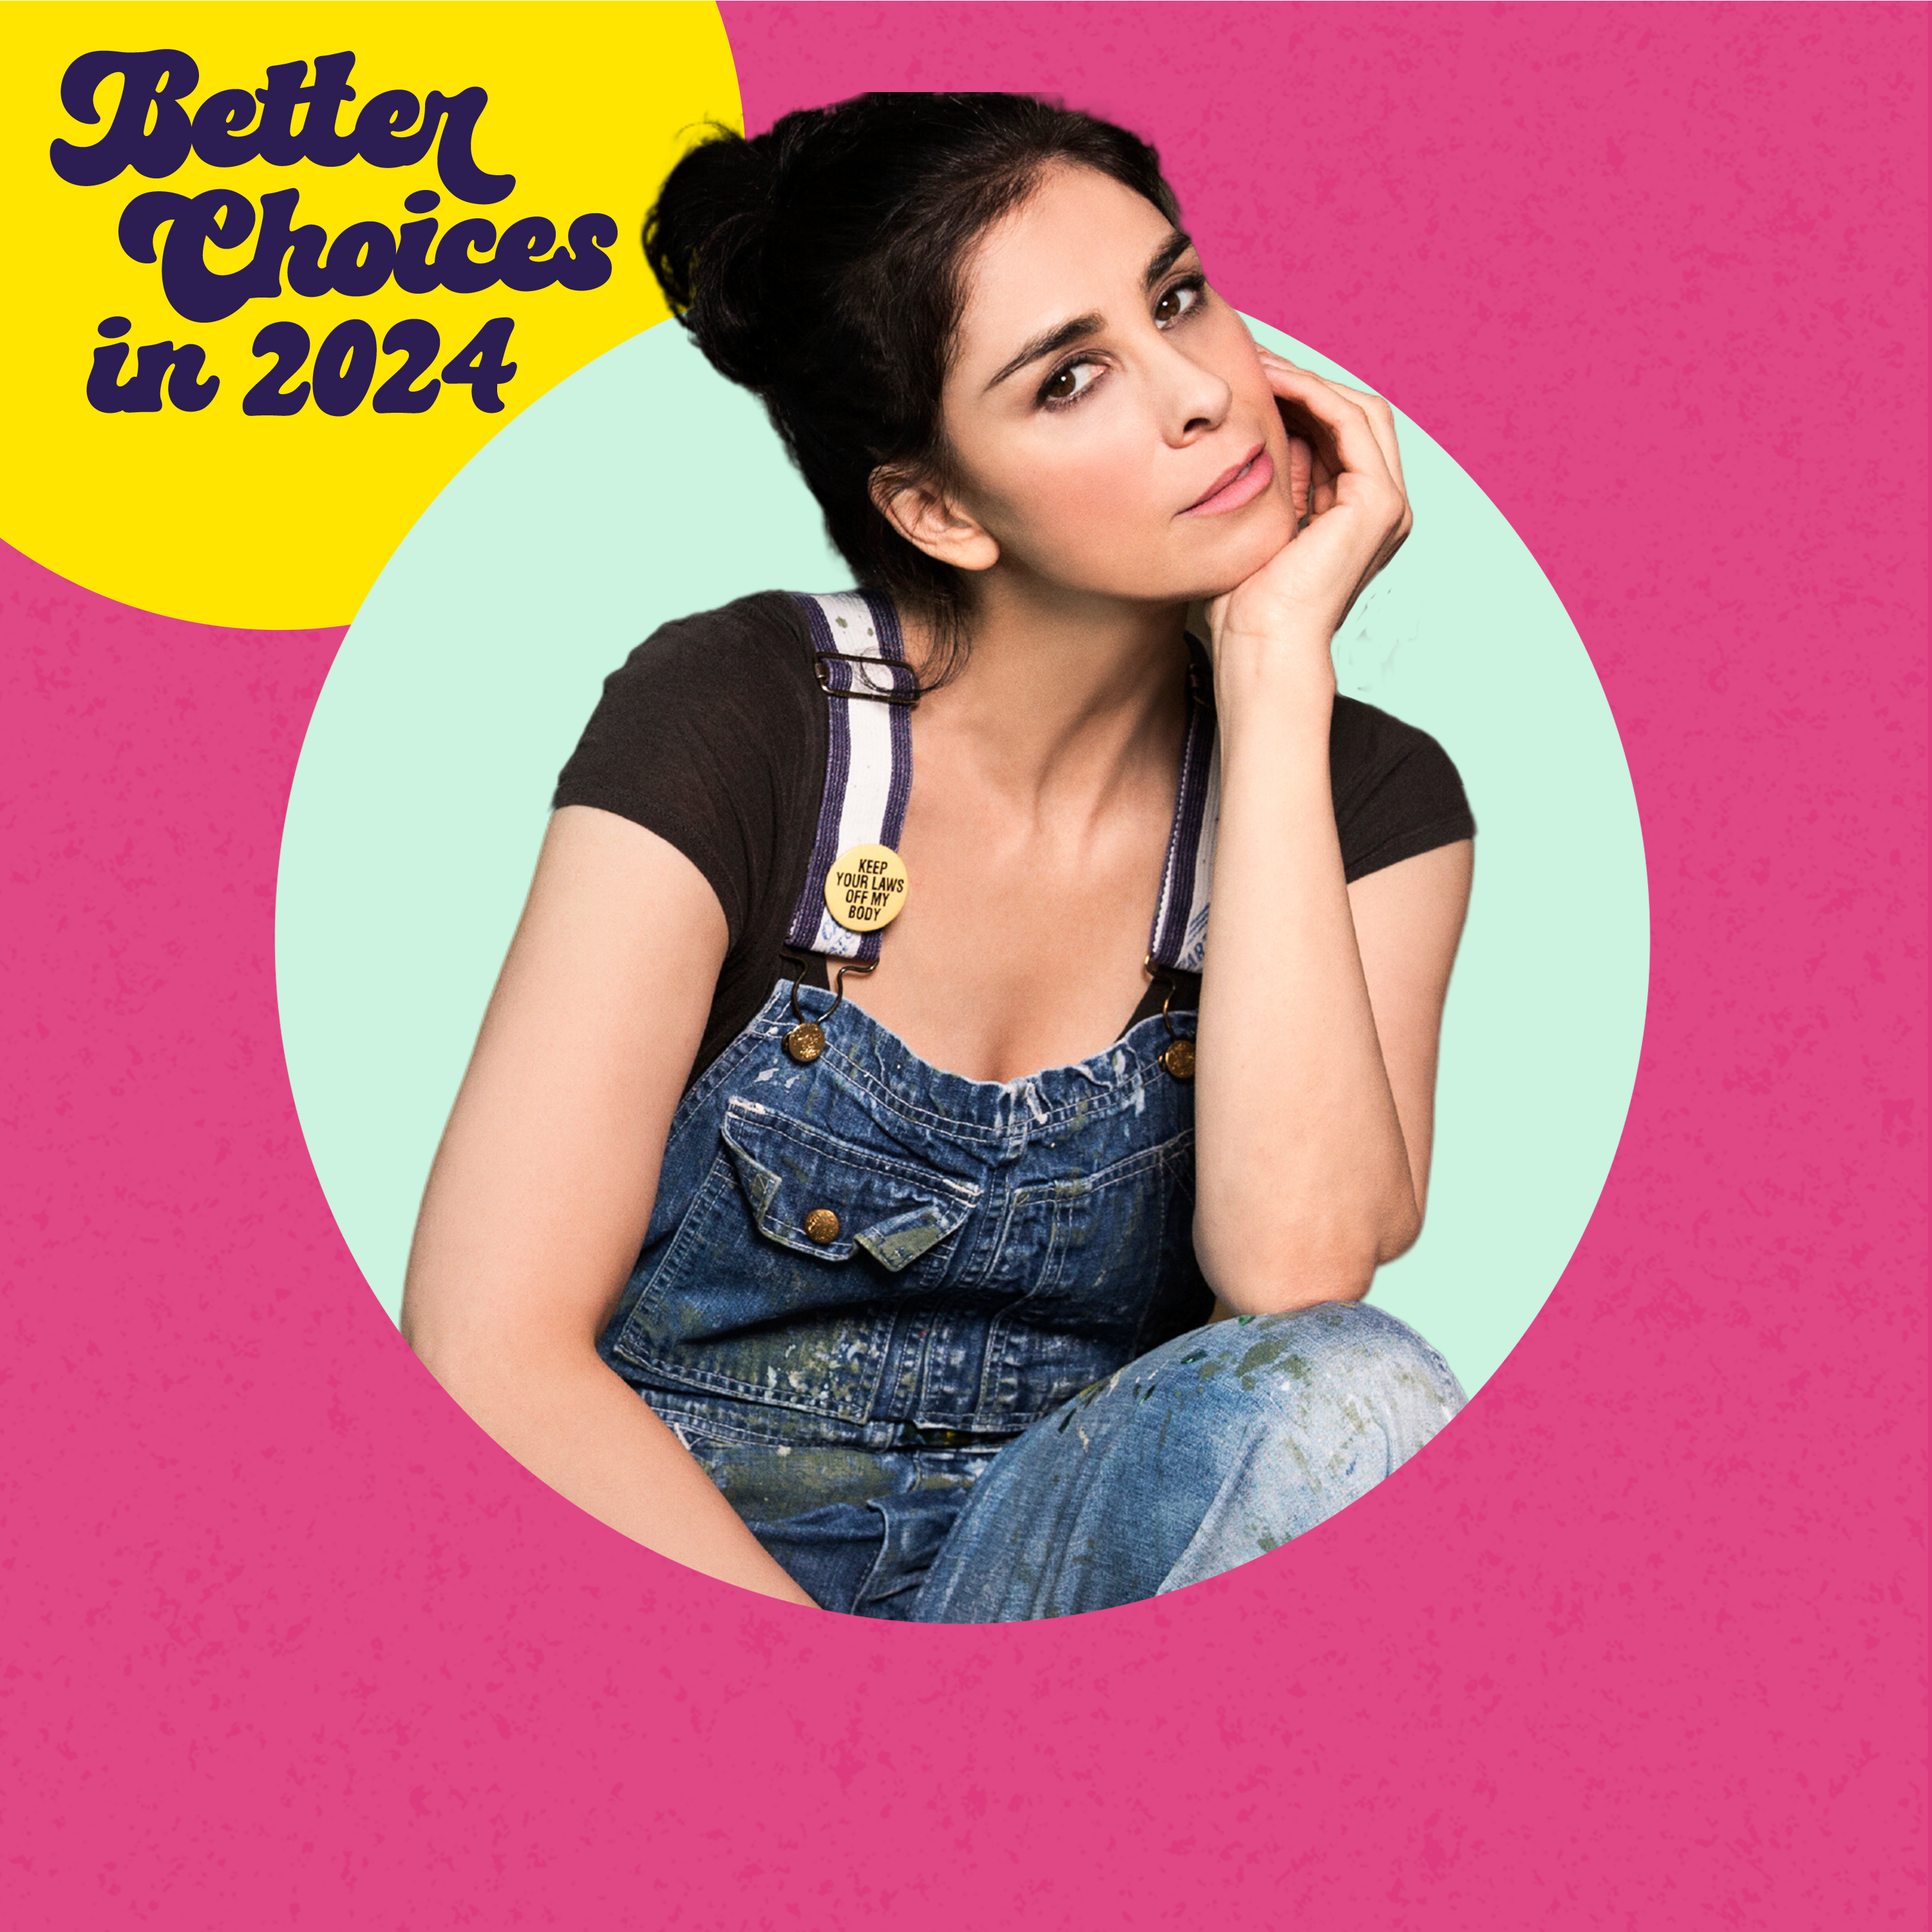 Better Choices in 2024: Give Advice or Take It? (with Sarah Silverman)